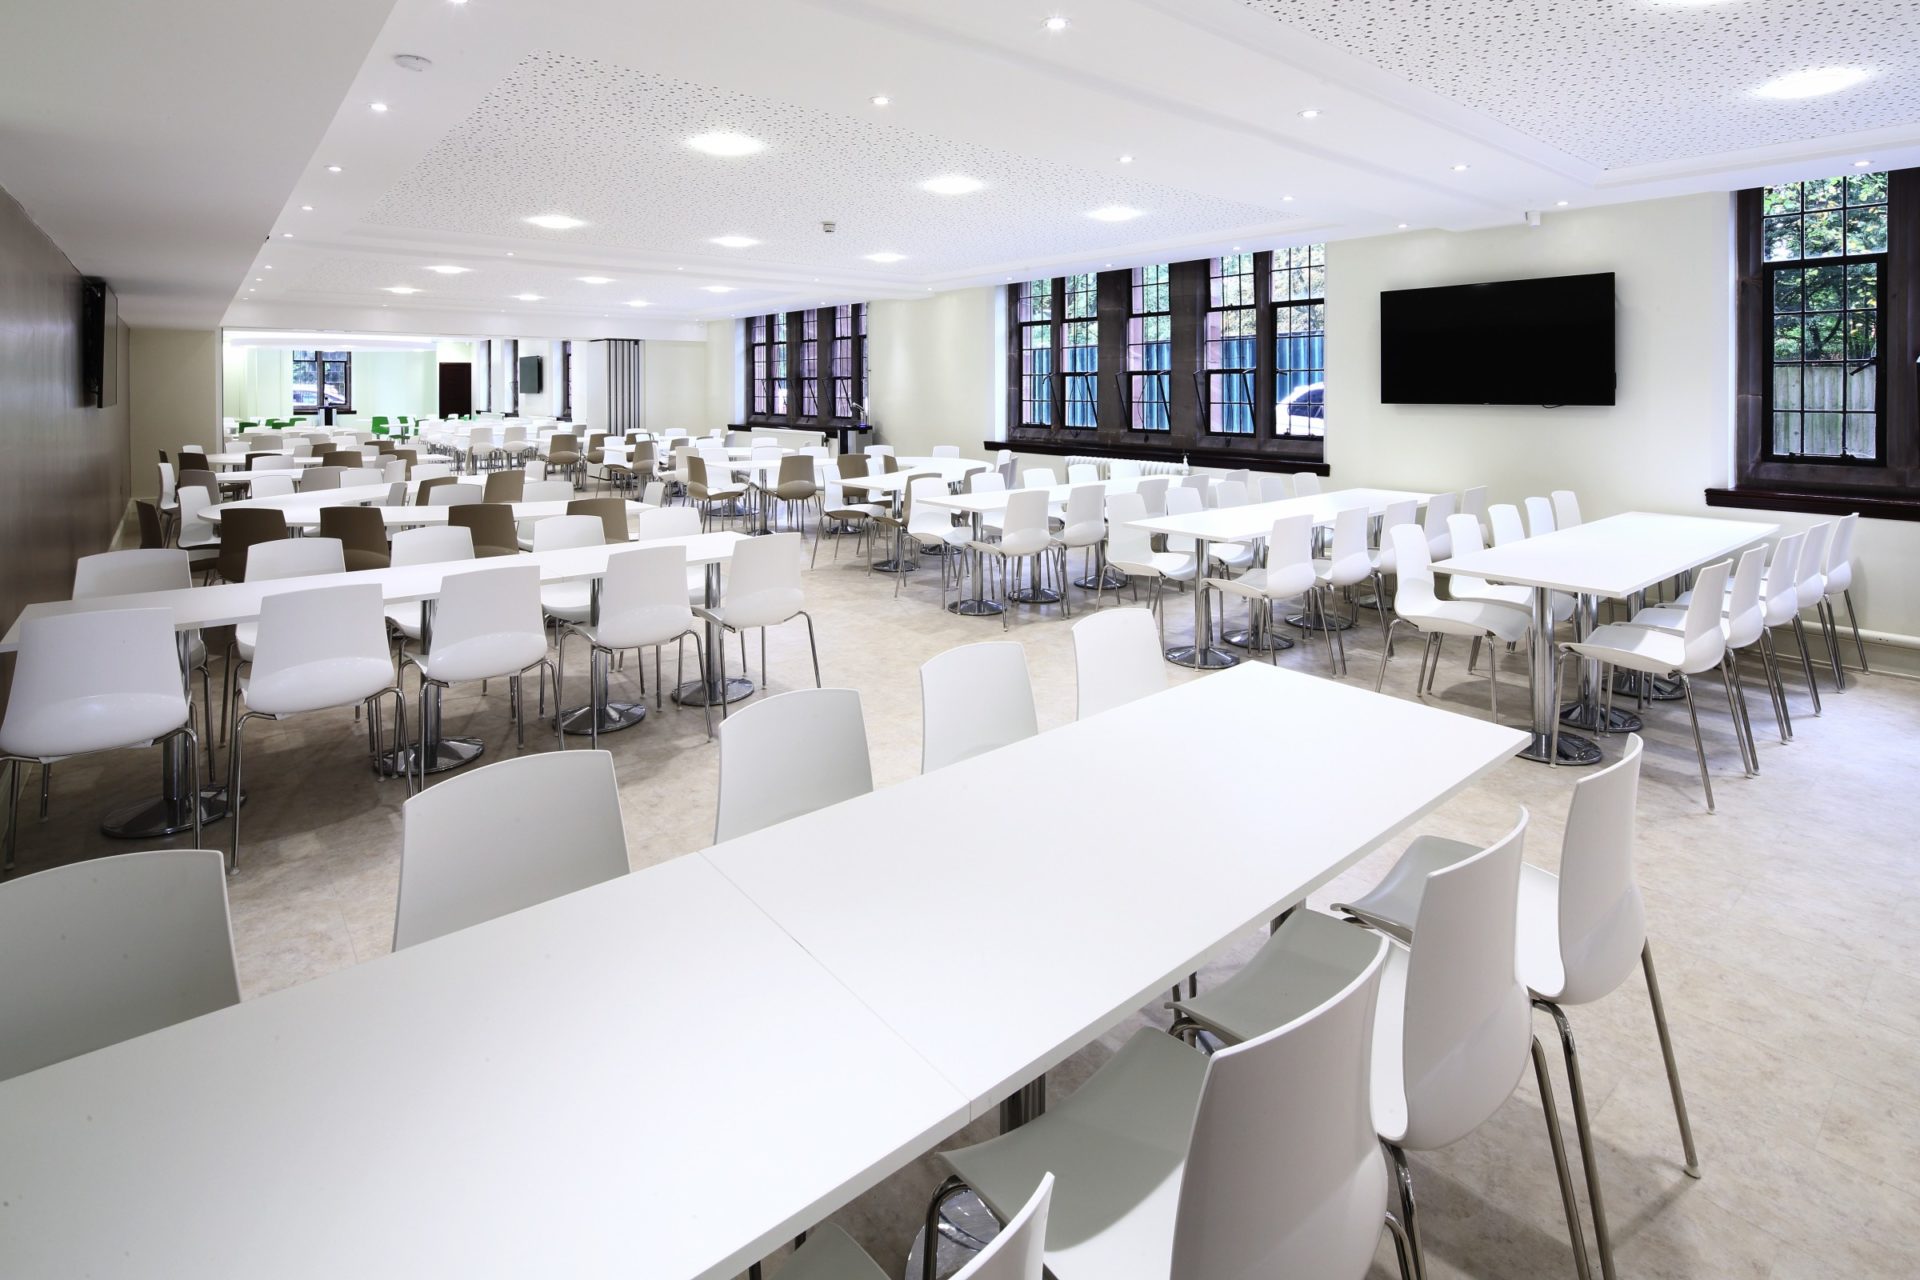 New Kitchen and dining hall, Bolton School